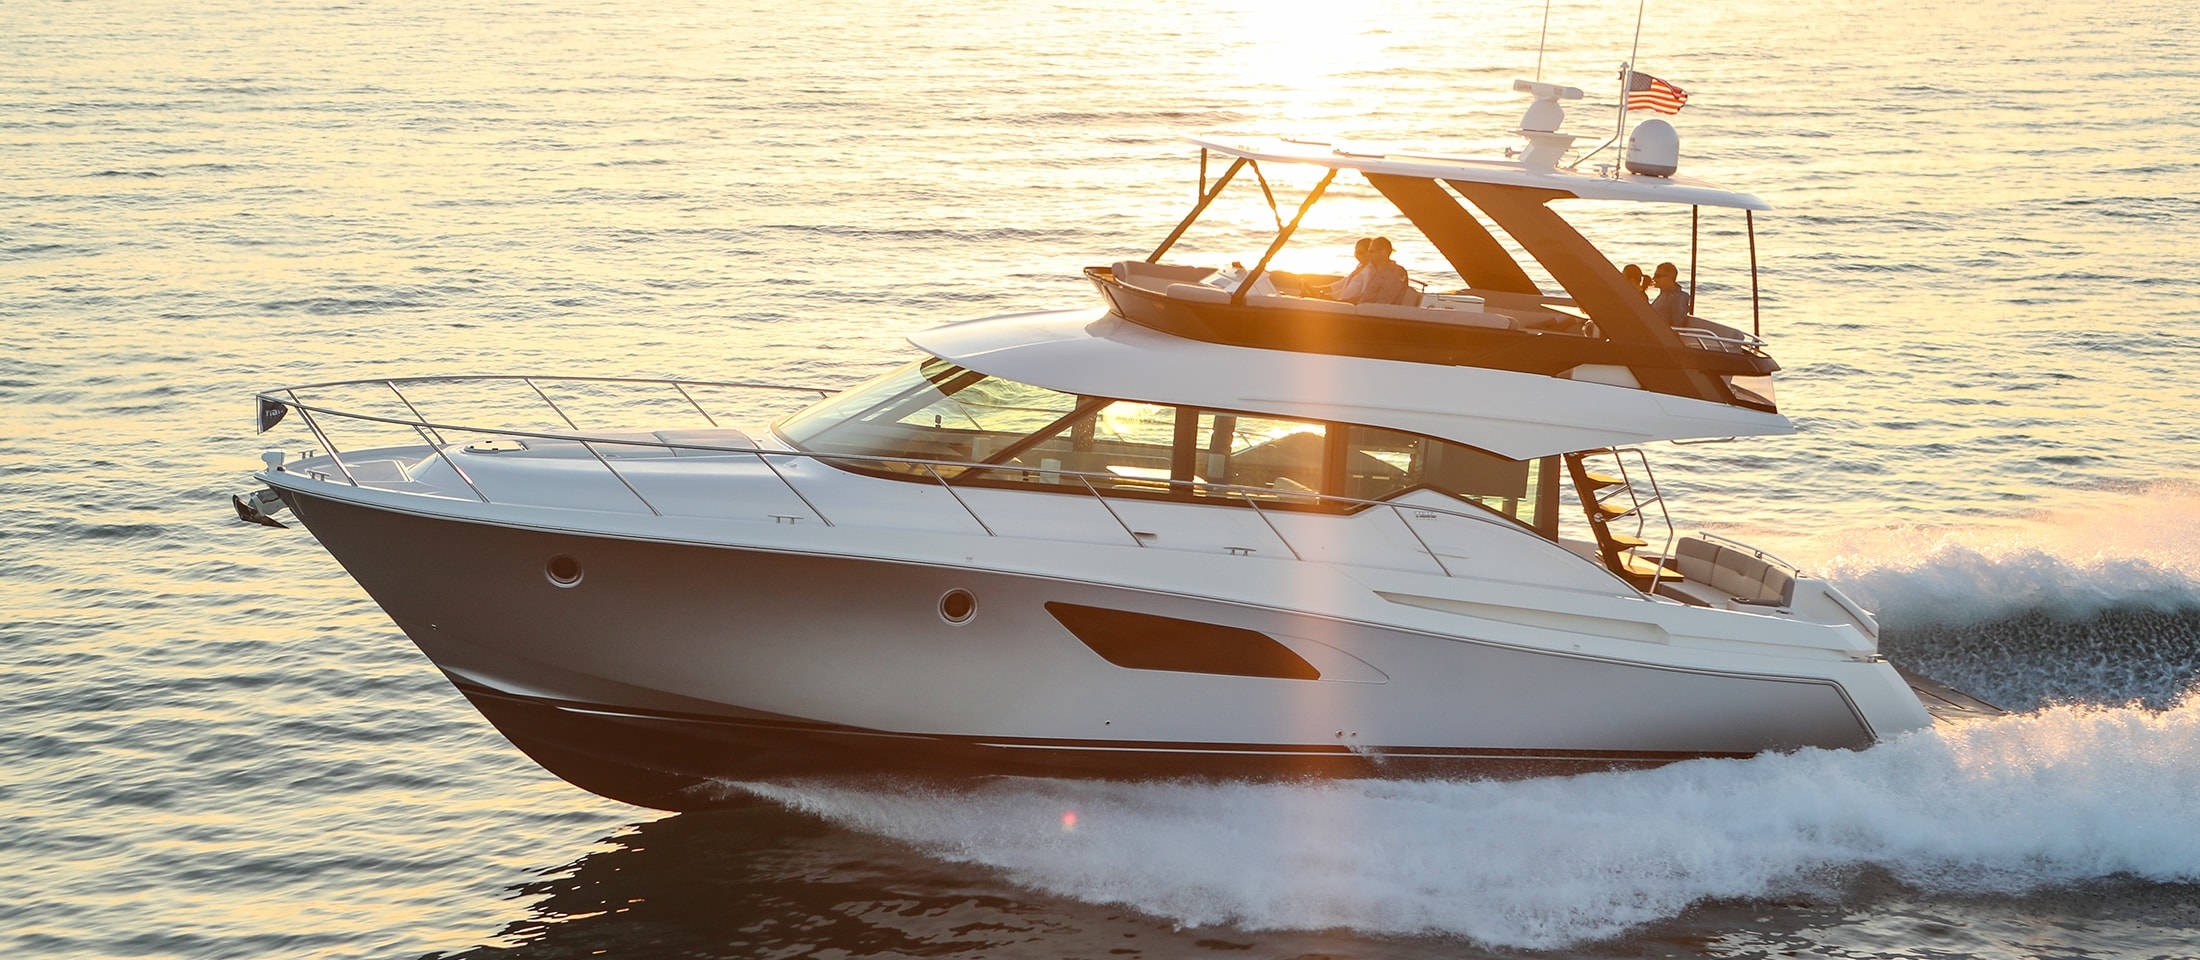 is tiara yachts still in business